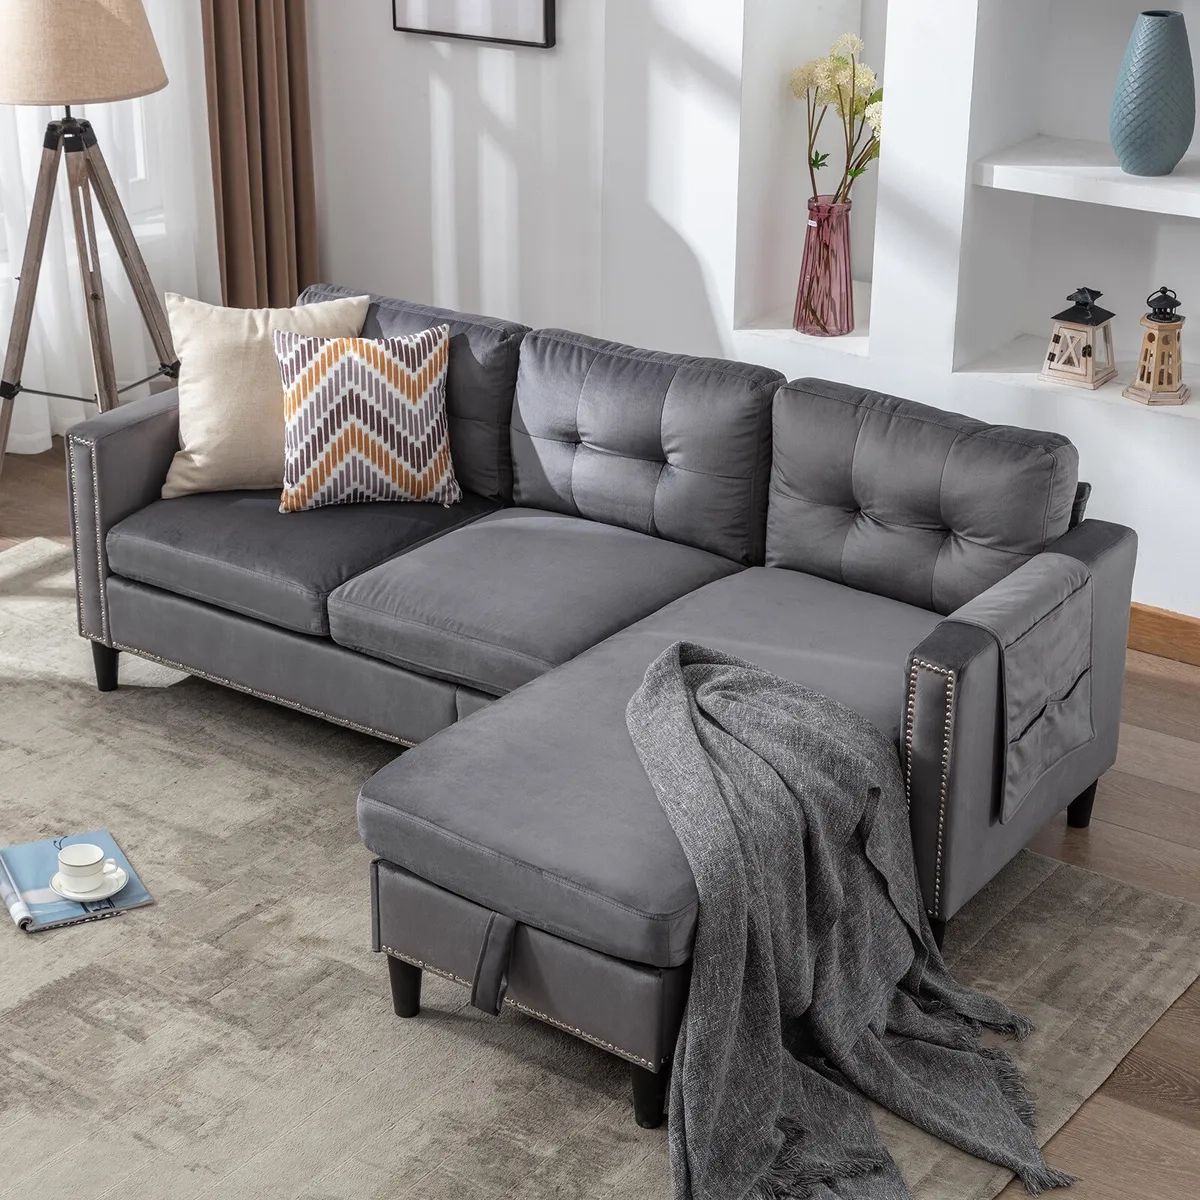 Gray Velvet L Shape Convertible Sofa Couch Reversible Chaise With Storage,  Usb | Ebay Regarding L Shape Couches With Reversible Chaises (View 14 of 15)